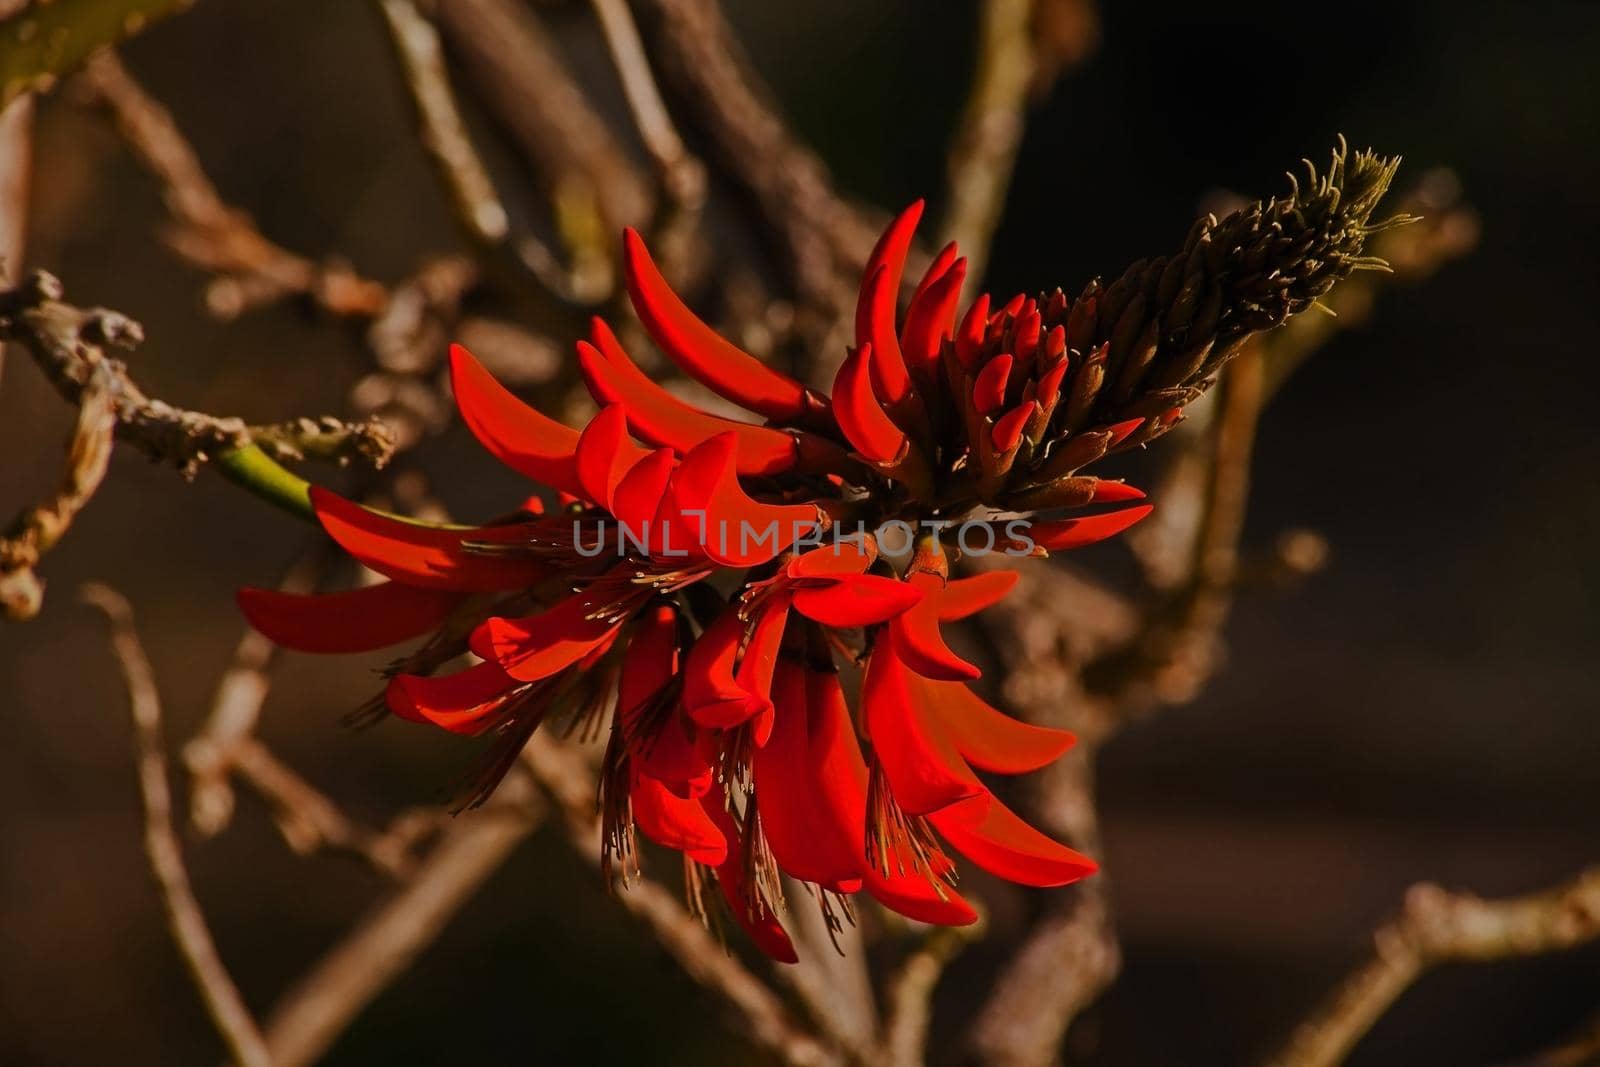 Red Coral Tree (Lysistemon erythrina) flower12435 by kobus_peche